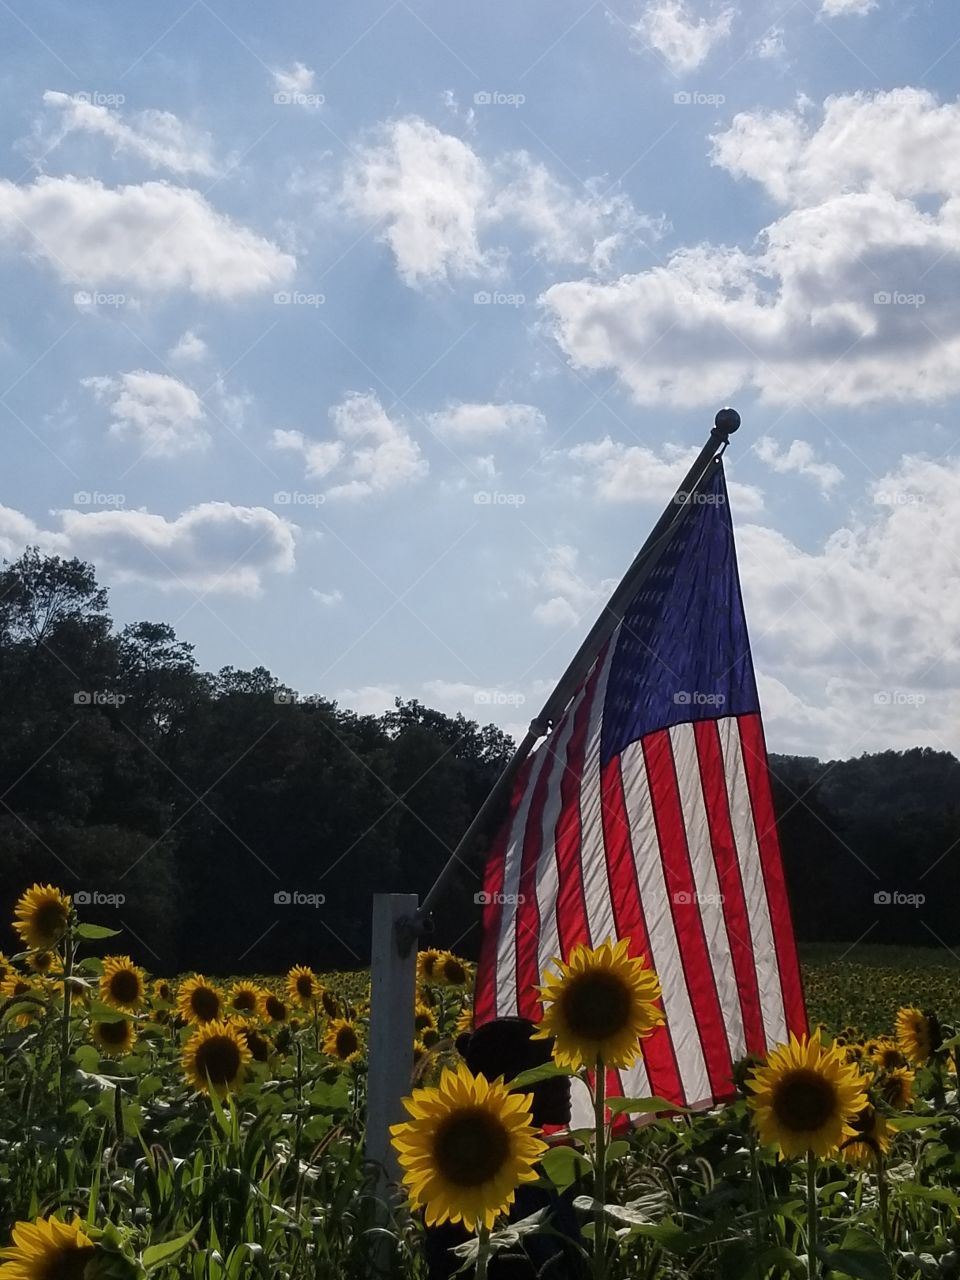 patriotic summer day in a field of sunflowers